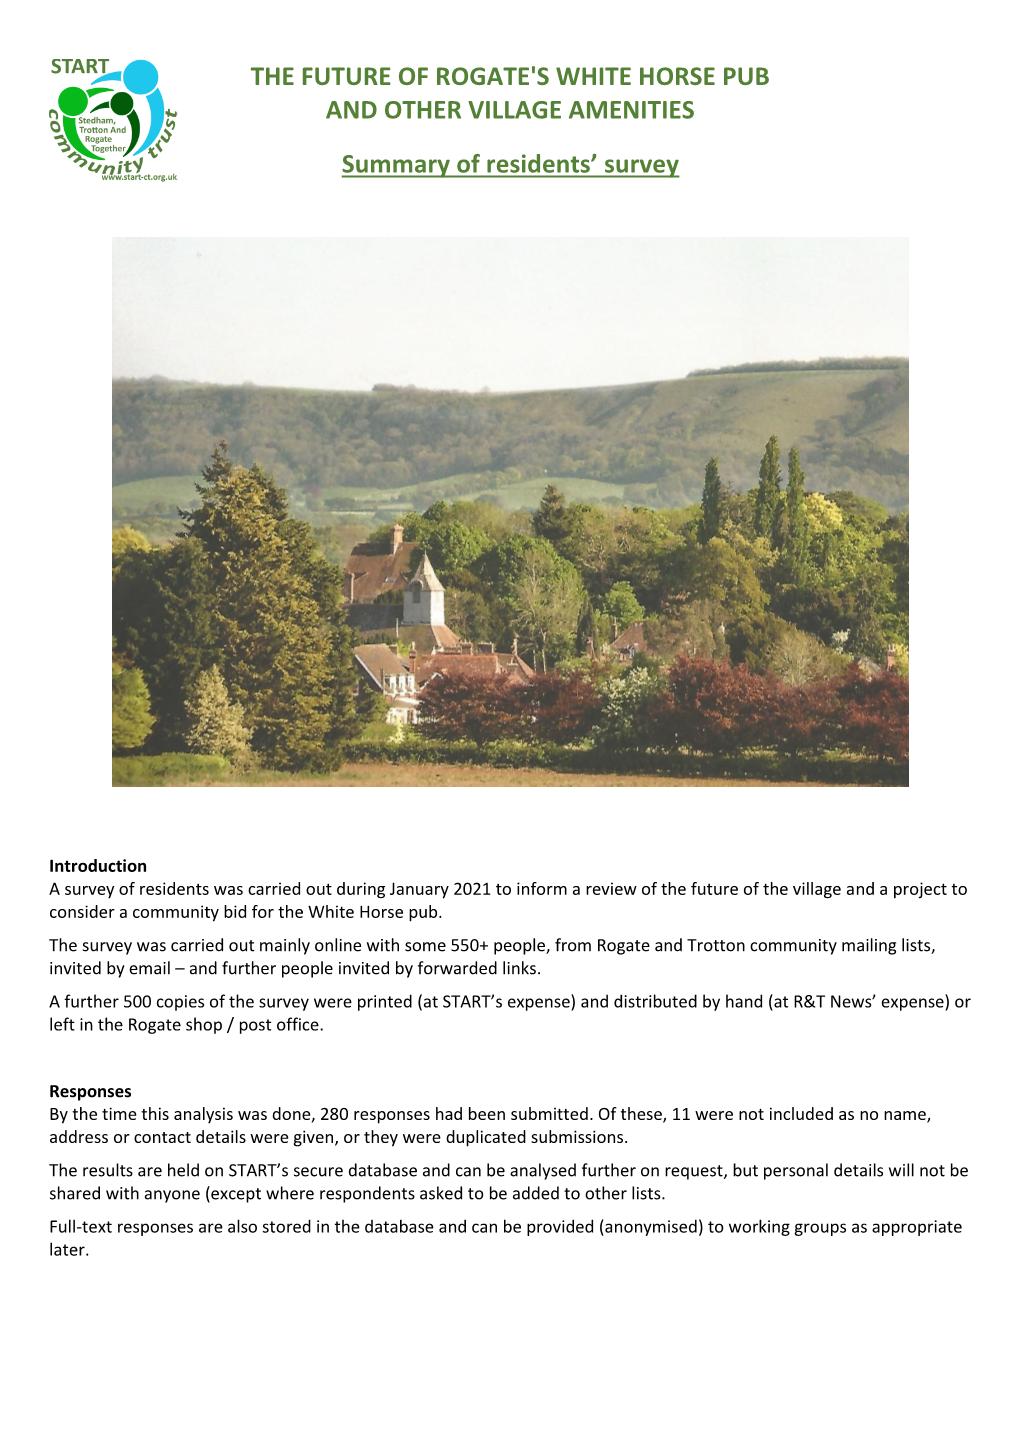 THE FUTURE of ROGATE's WHITE HORSE PUB and OTHER VILLAGE AMENITIES Summary of Residents’ Survey